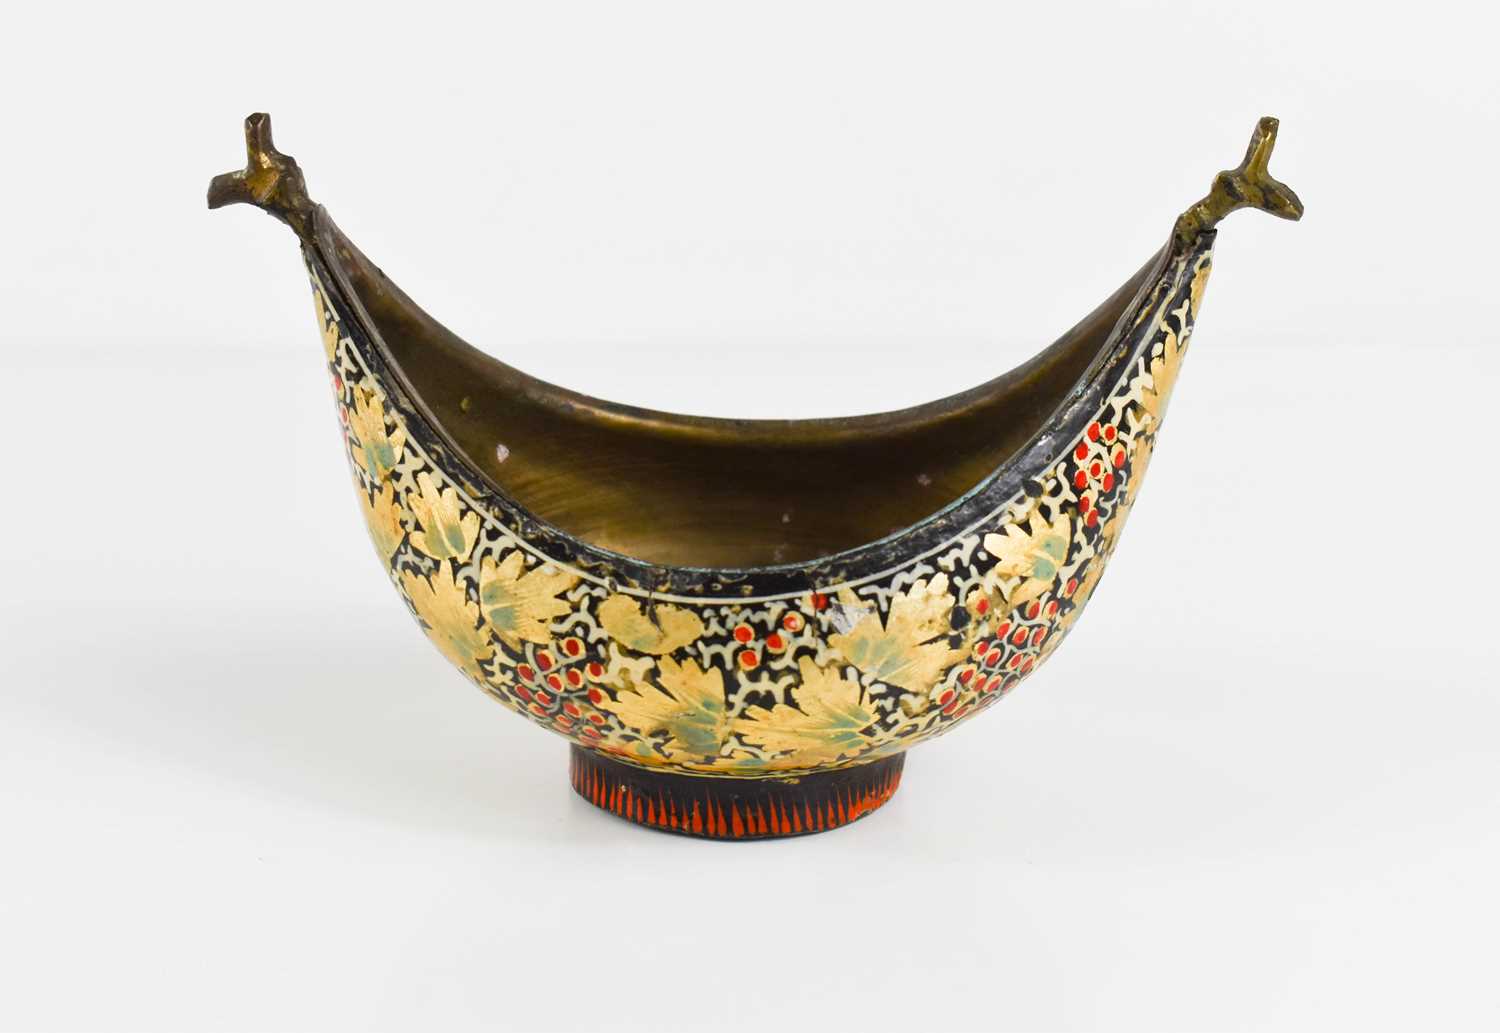 A lacquered bronze Kovsch, possibly Russian decorated with gilt vine leaves, red berries and